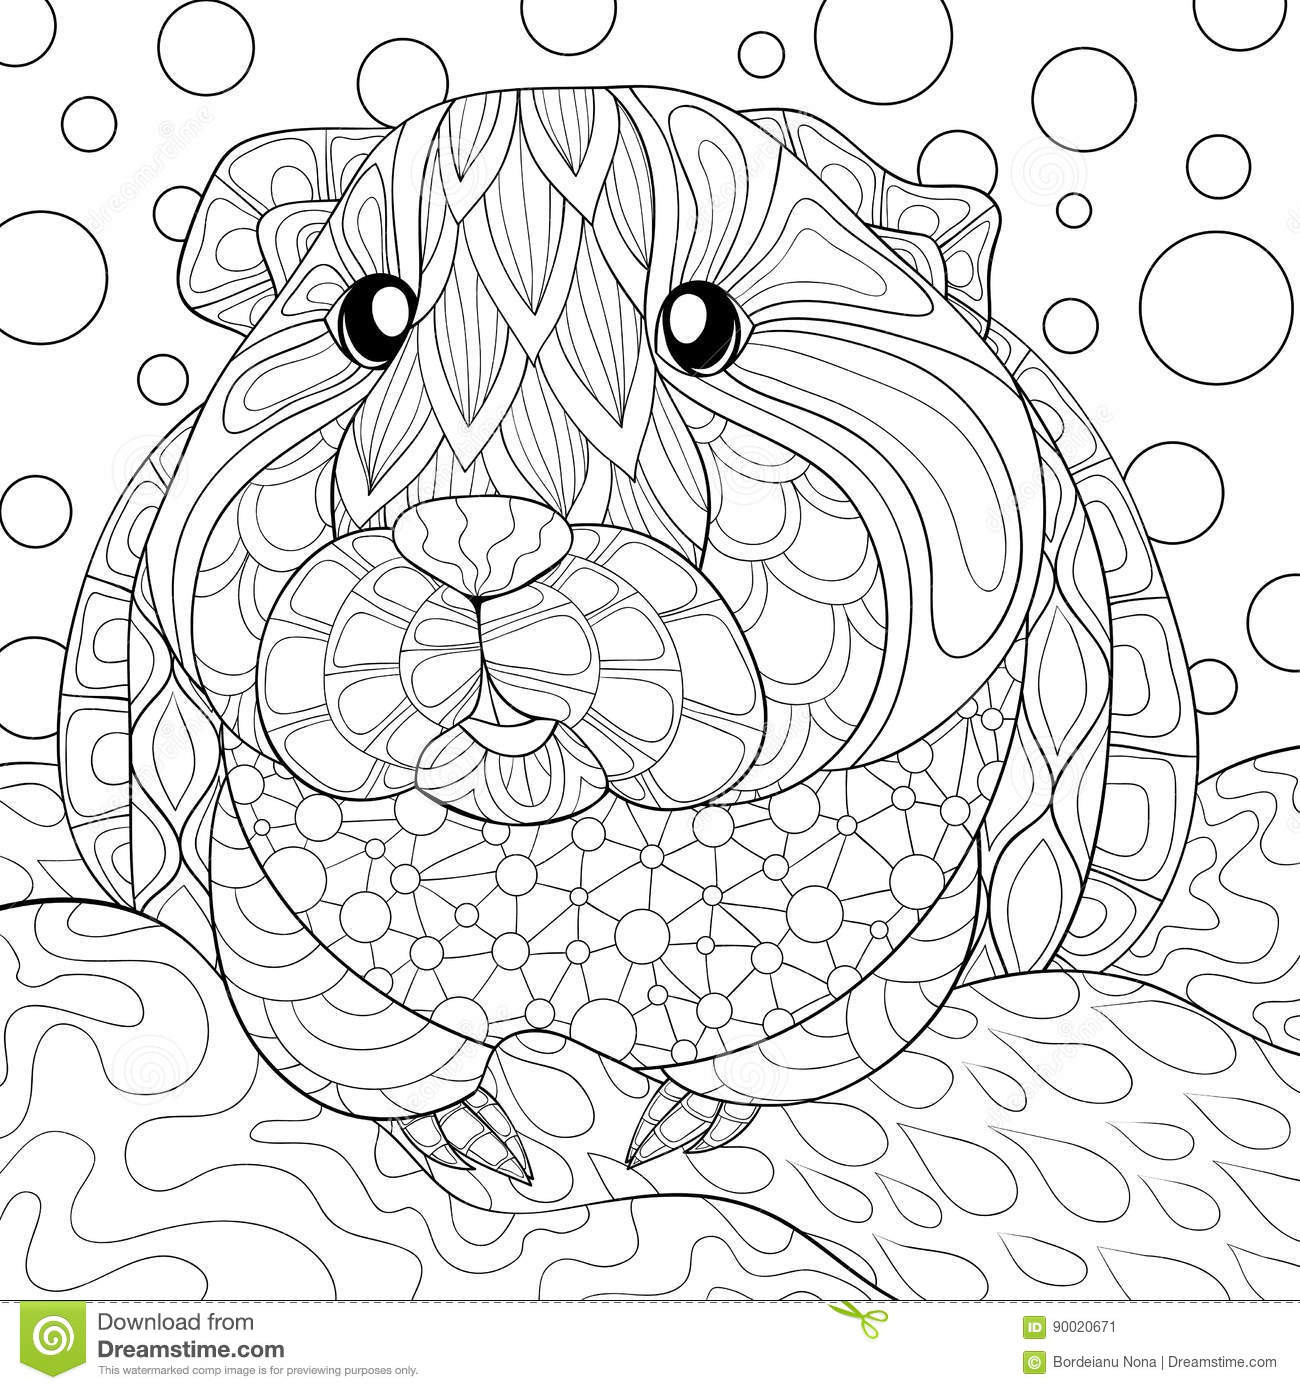 Pig Coloring Pages For Adults
 Adult Coloring Page Guinea Pig Stock Vector Illustration